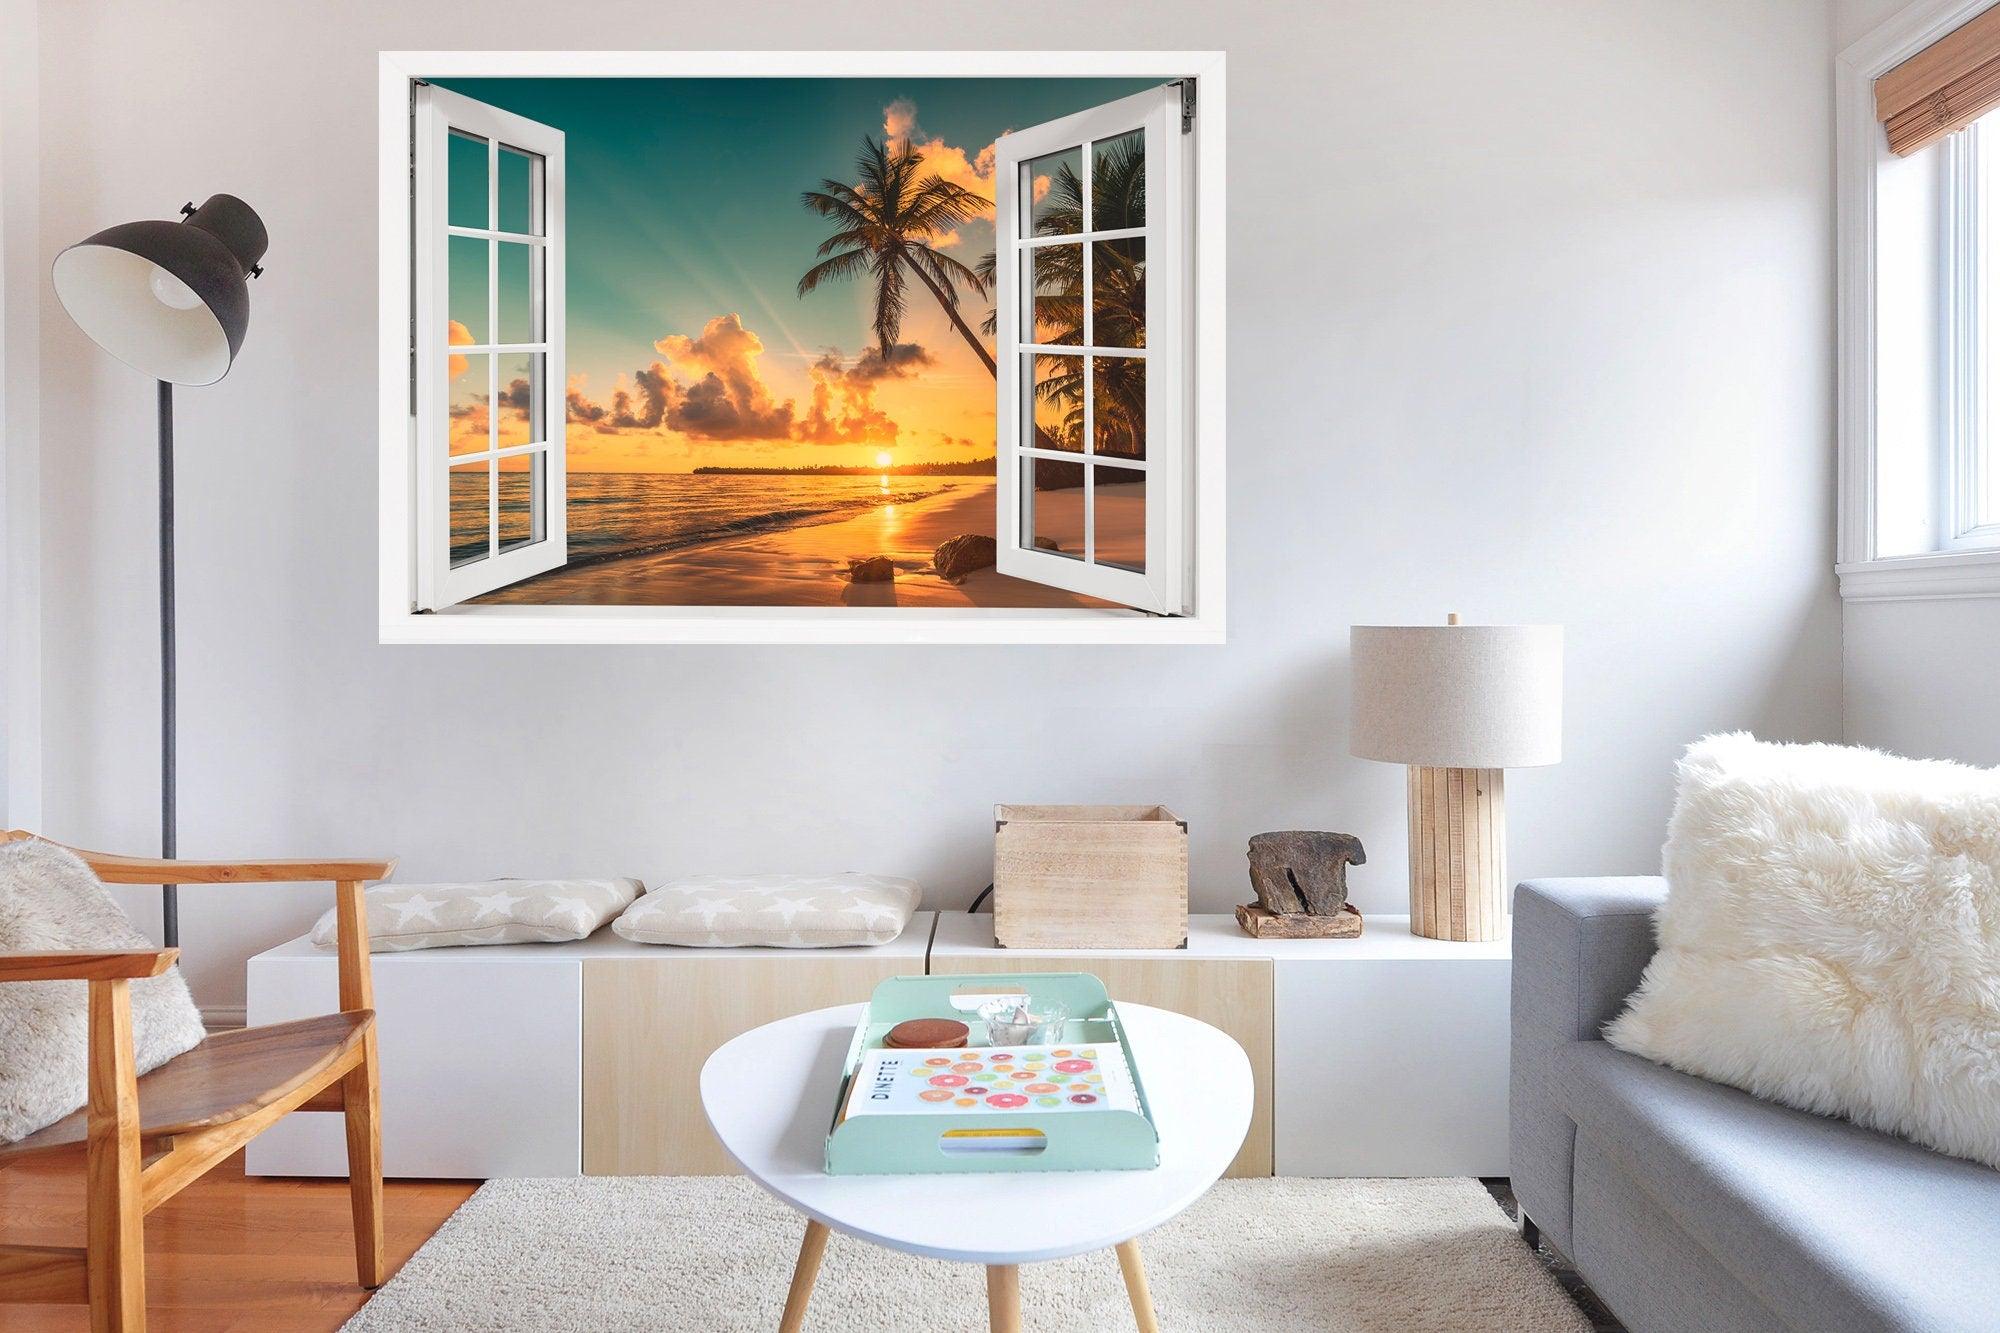 Window Scape Beach Golden Sunset over beach and sand #17, Window Decal, Sticker Sunset, Removable, Fabric, Window Frame, Office,Bedroom, 3D